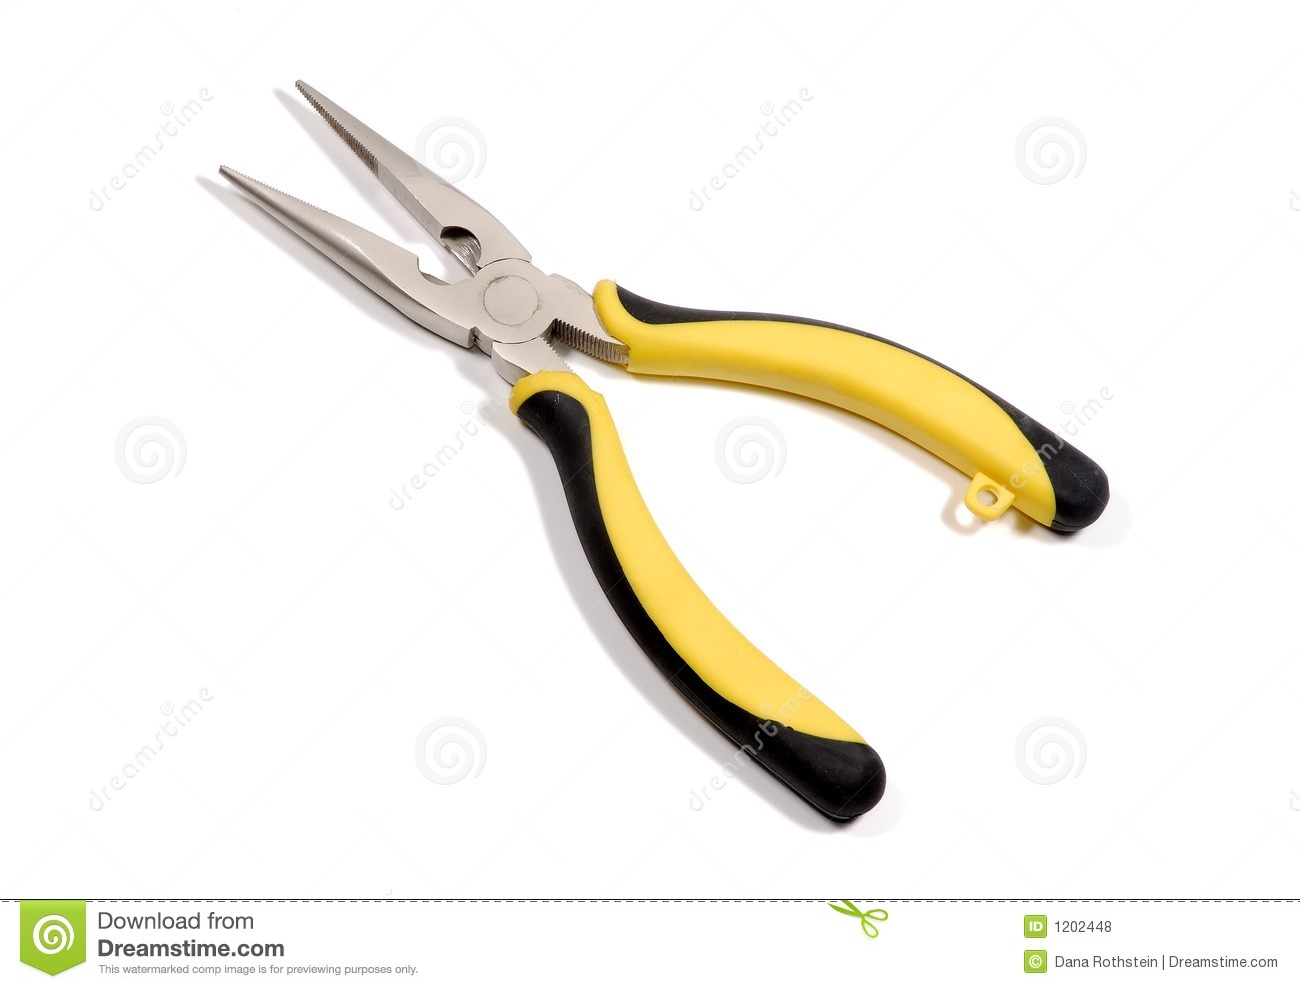 Needle Nose Pliers Royalty Free Stock Photos   Image  1202448